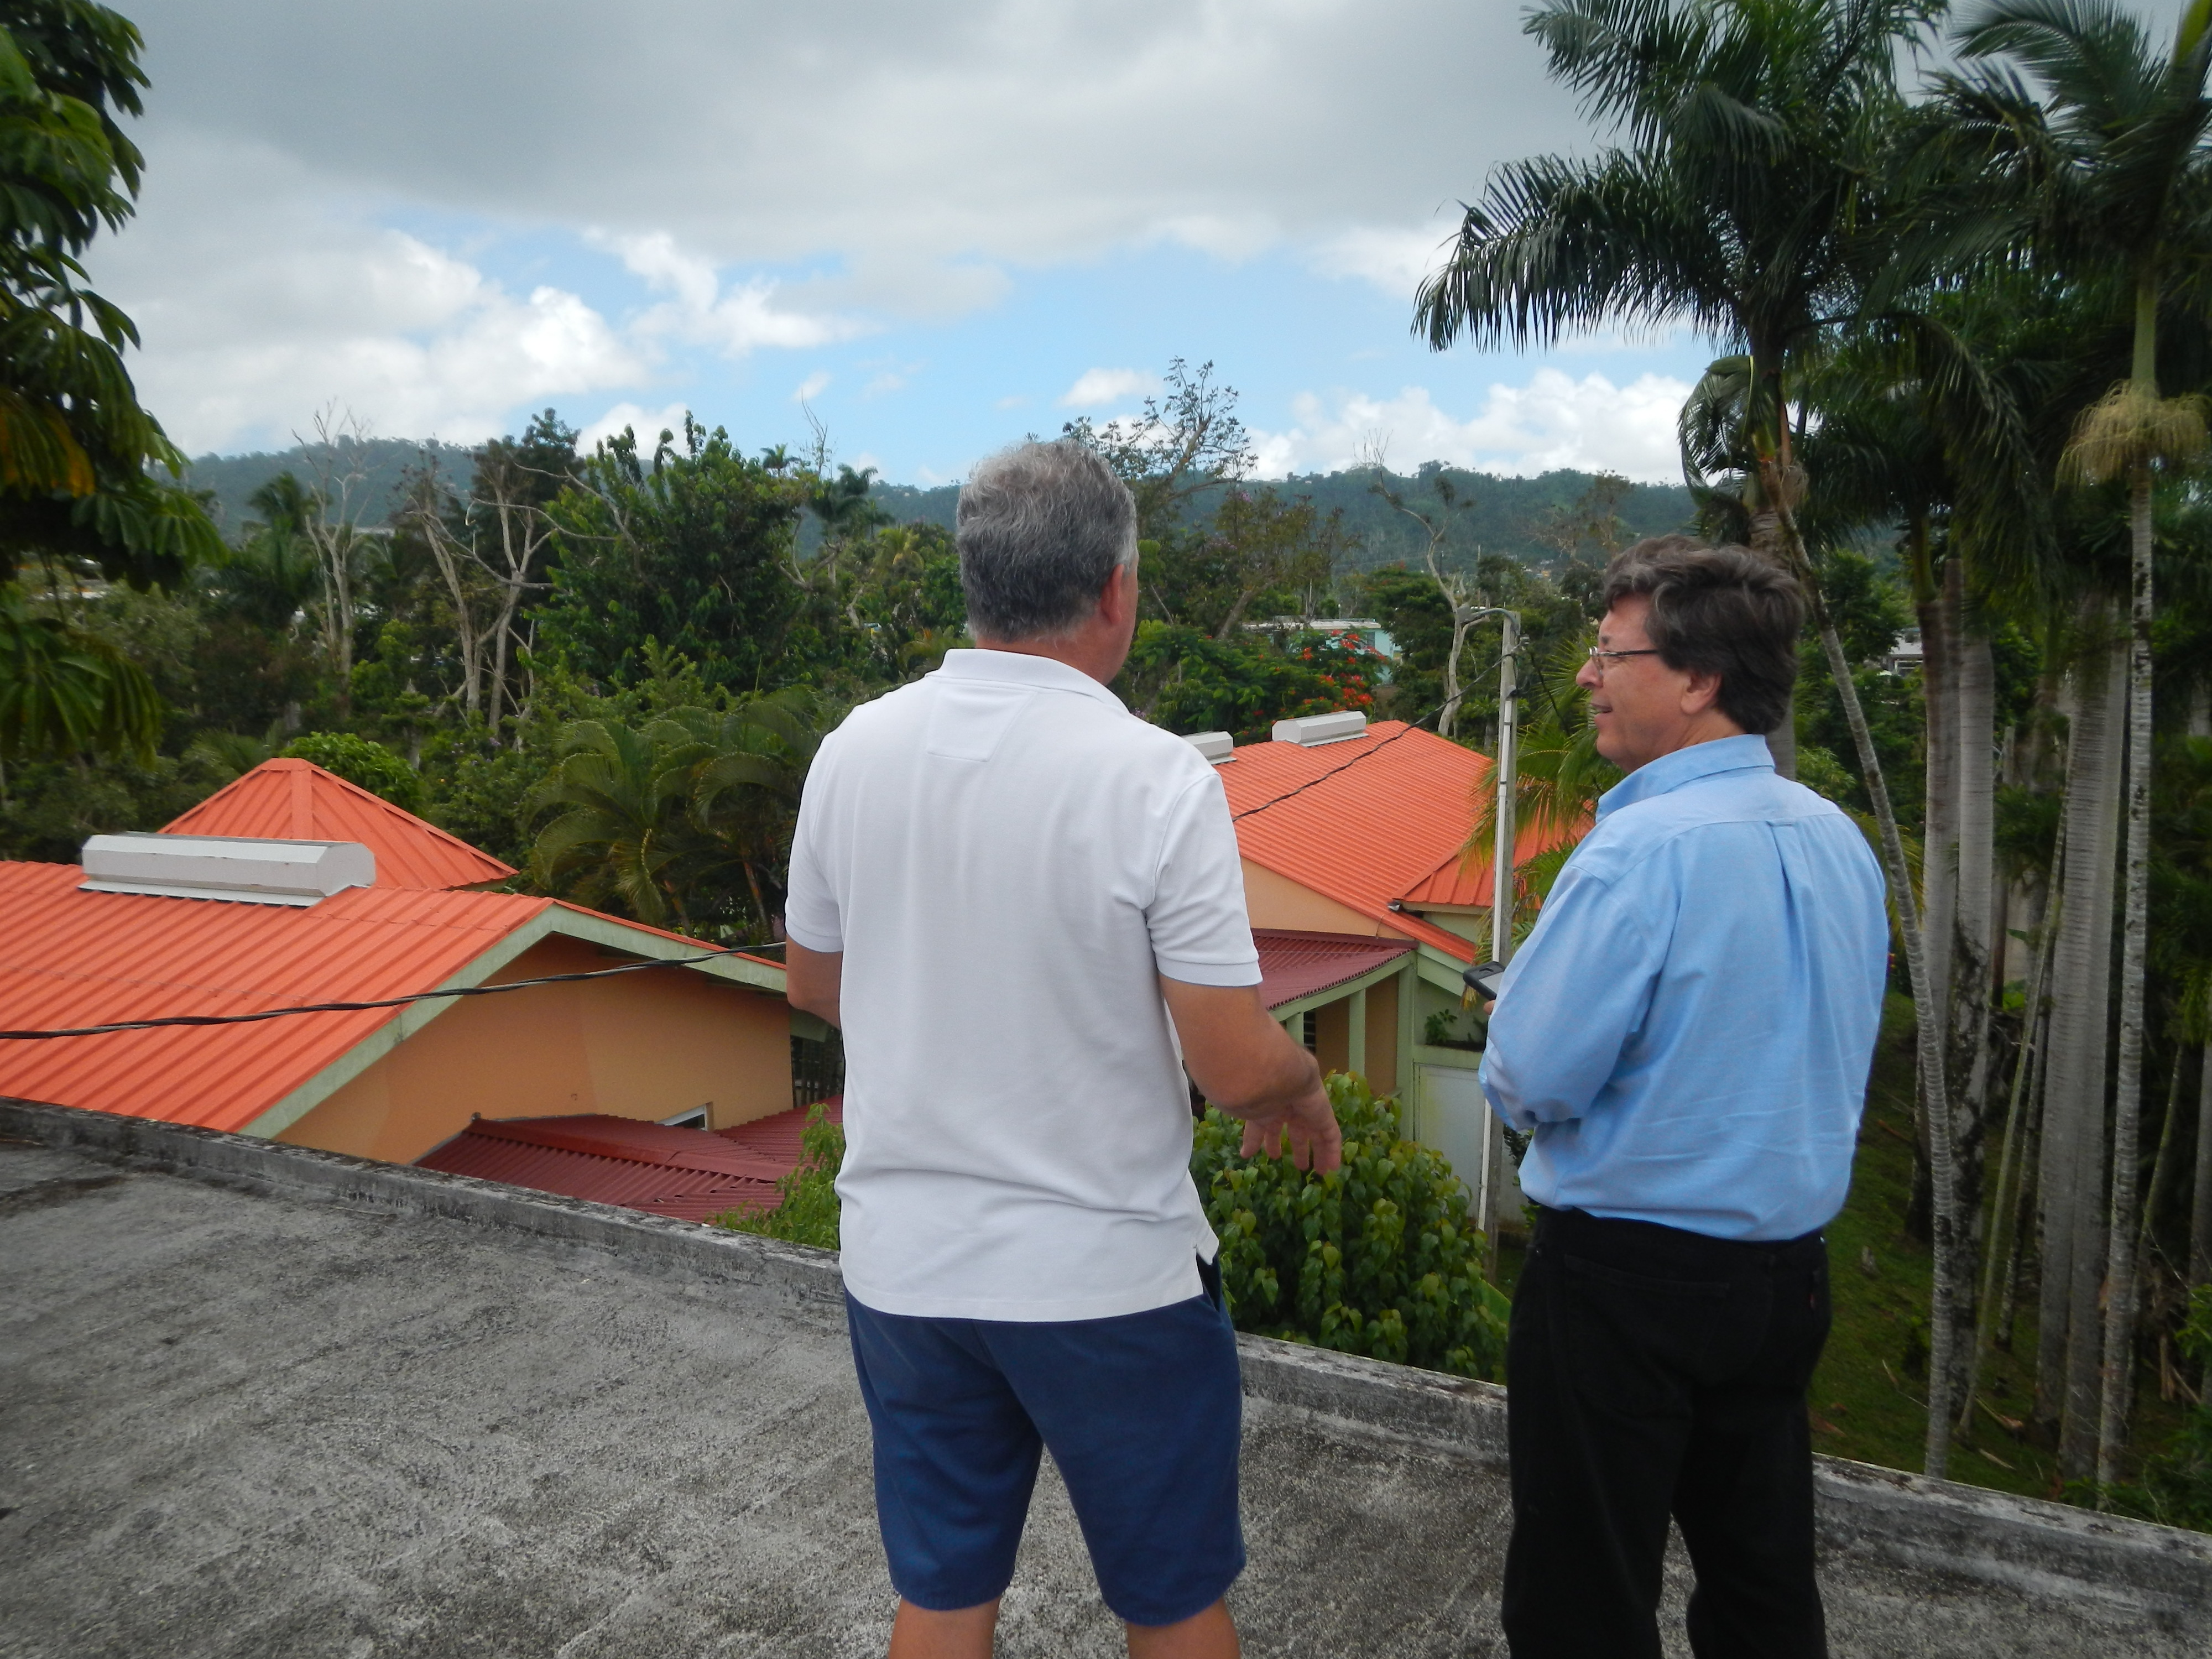 Crosscut’s news story about Solarize Puerto Rico